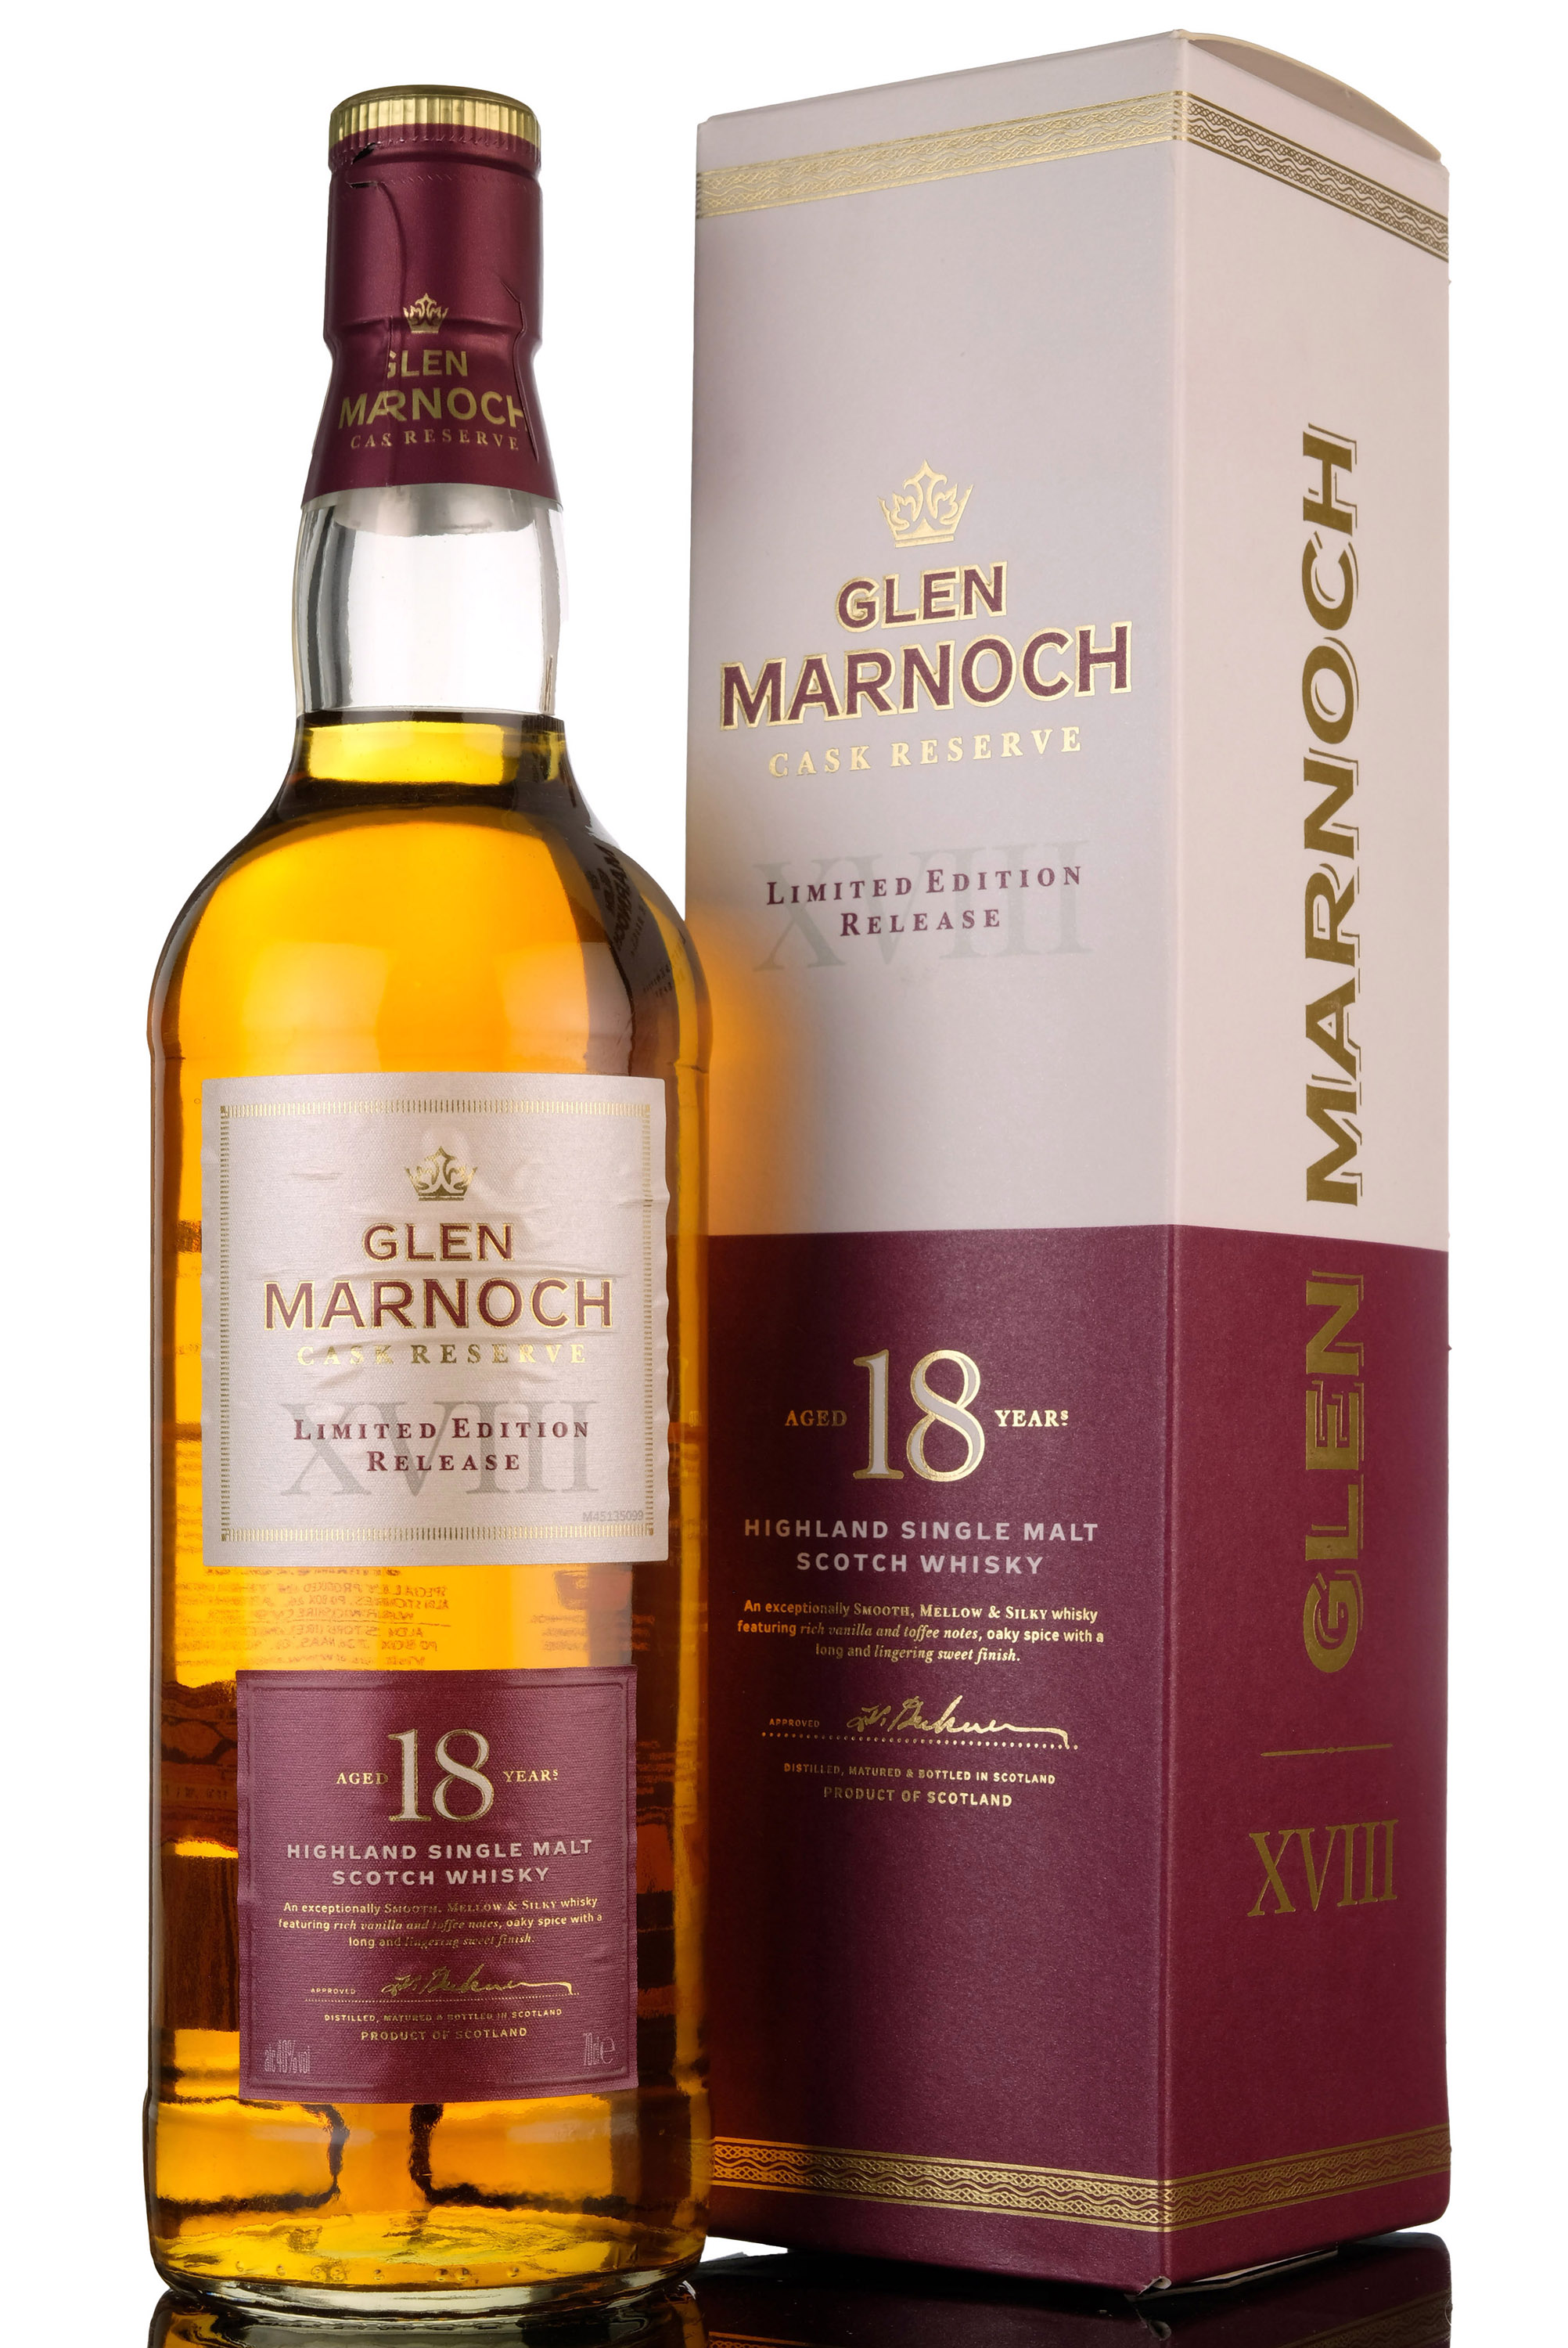 Glen Marnoch 18 Year Old - Limited Edition Release